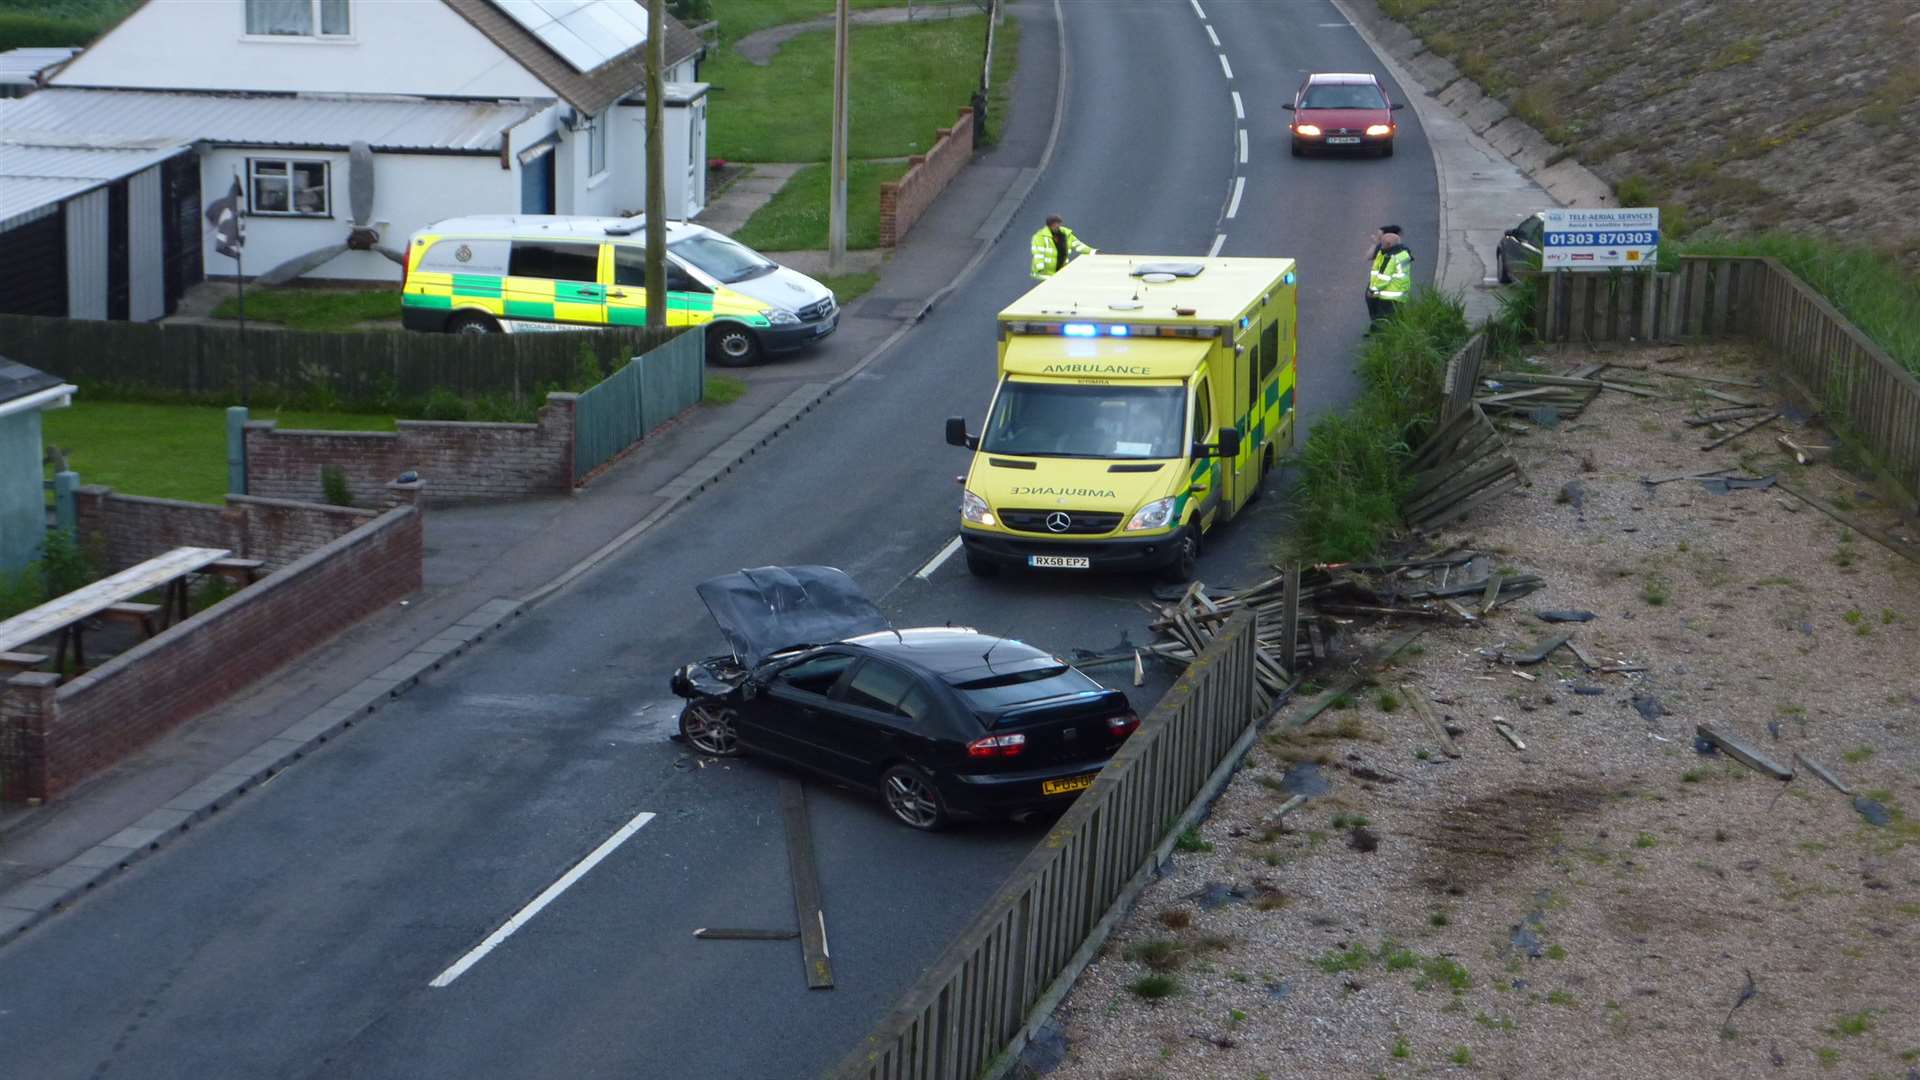 Seven cars have crashed through Guy Ruddy's fence